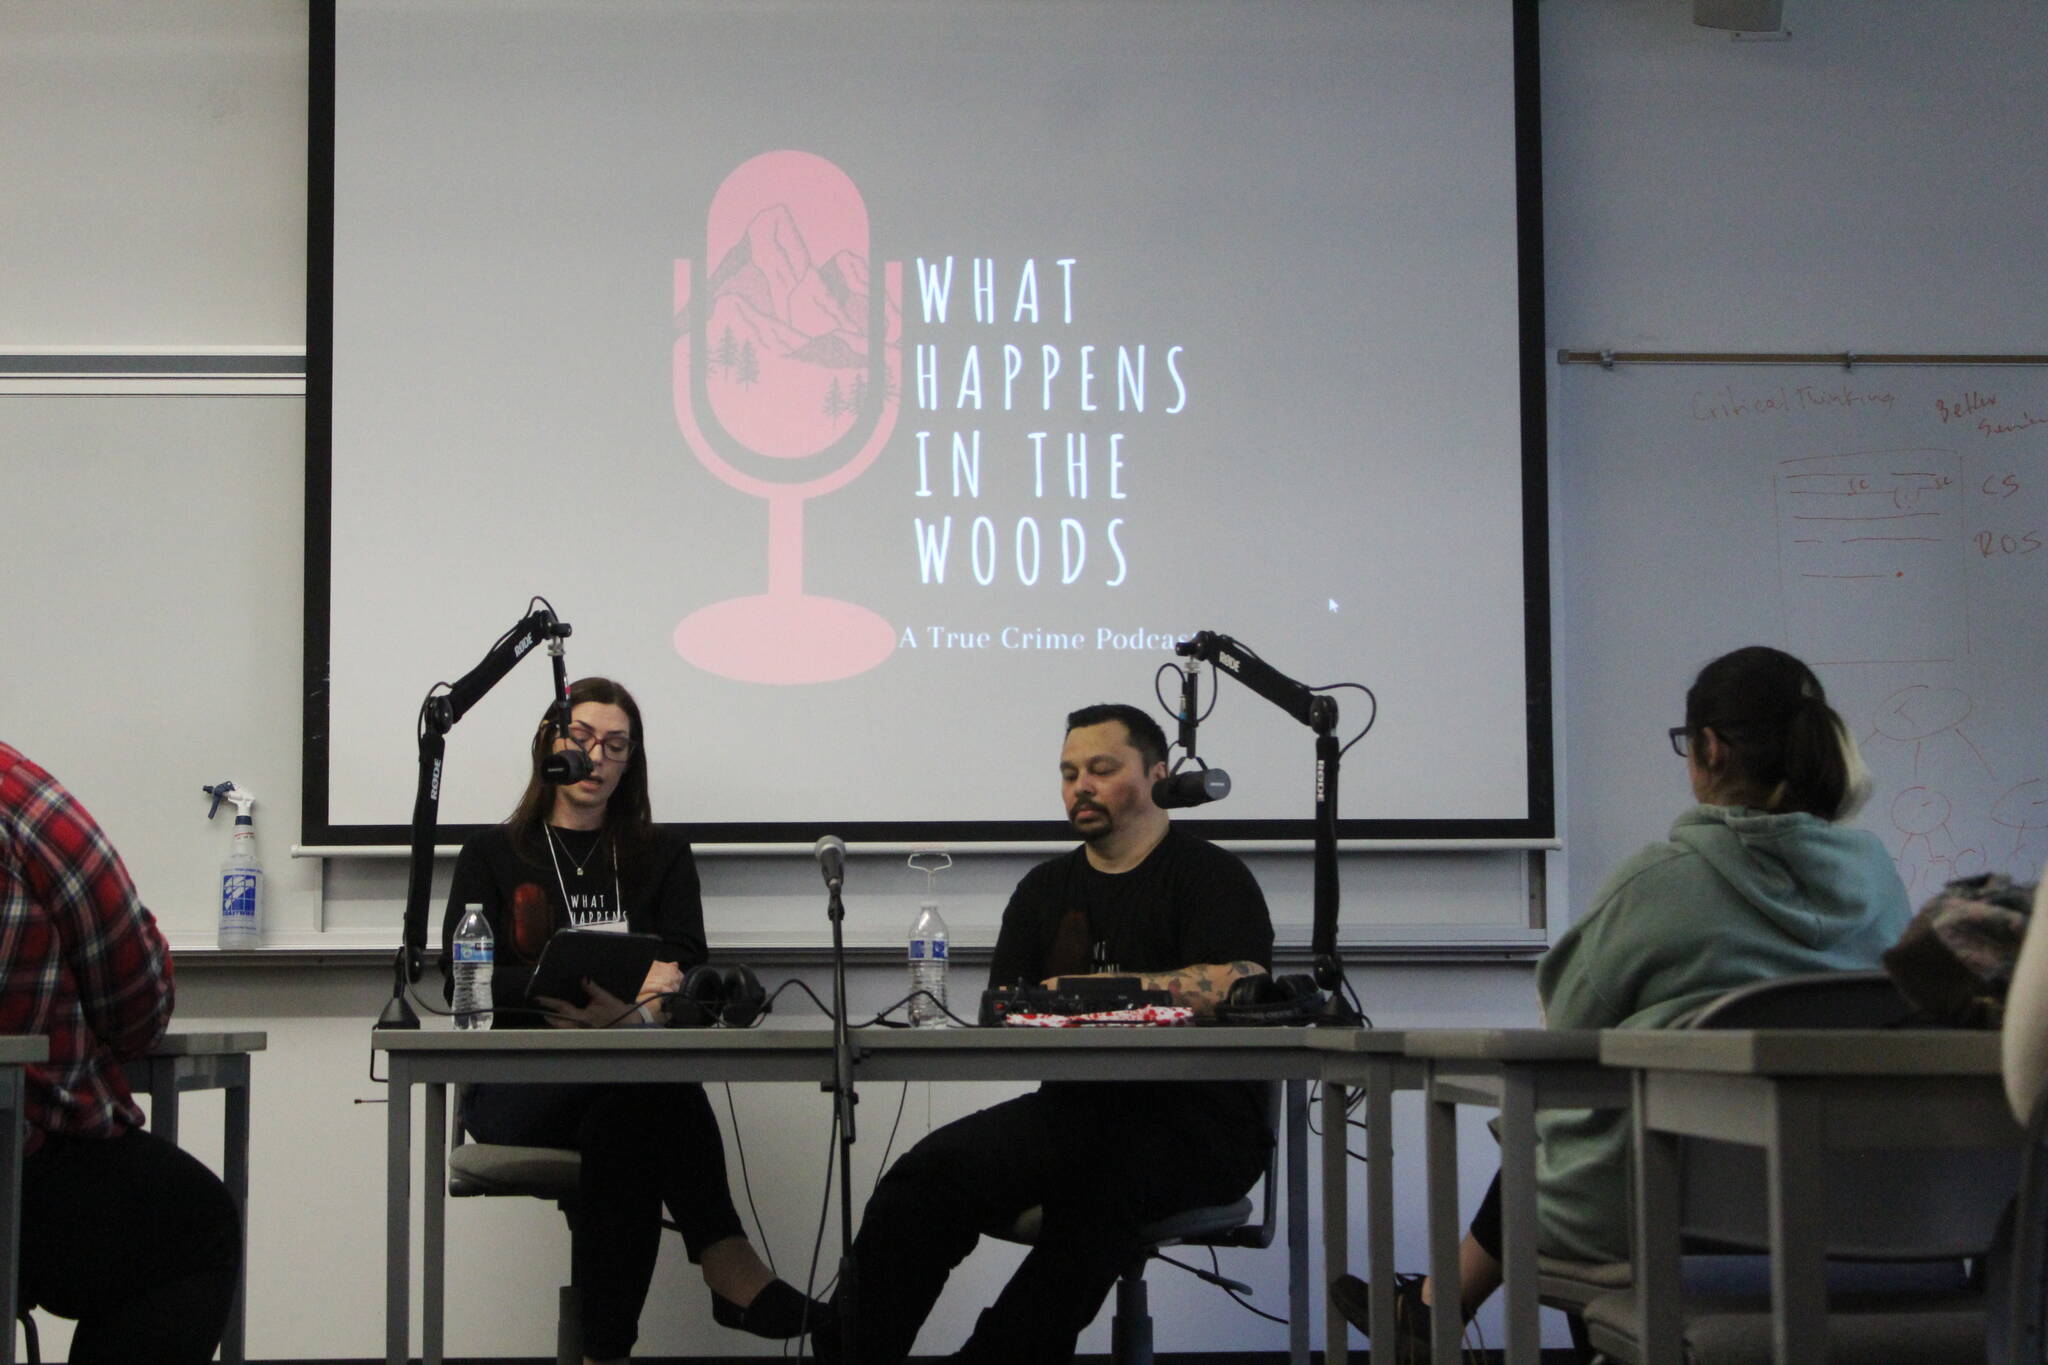 Co-hosts Jess and Brice of “What Happens In The Woods” recorded a live podcast episode about “The Jungle”, a homeless encampment in Seattle. Photo by Bailey Jo Josie/Sound Publishing.